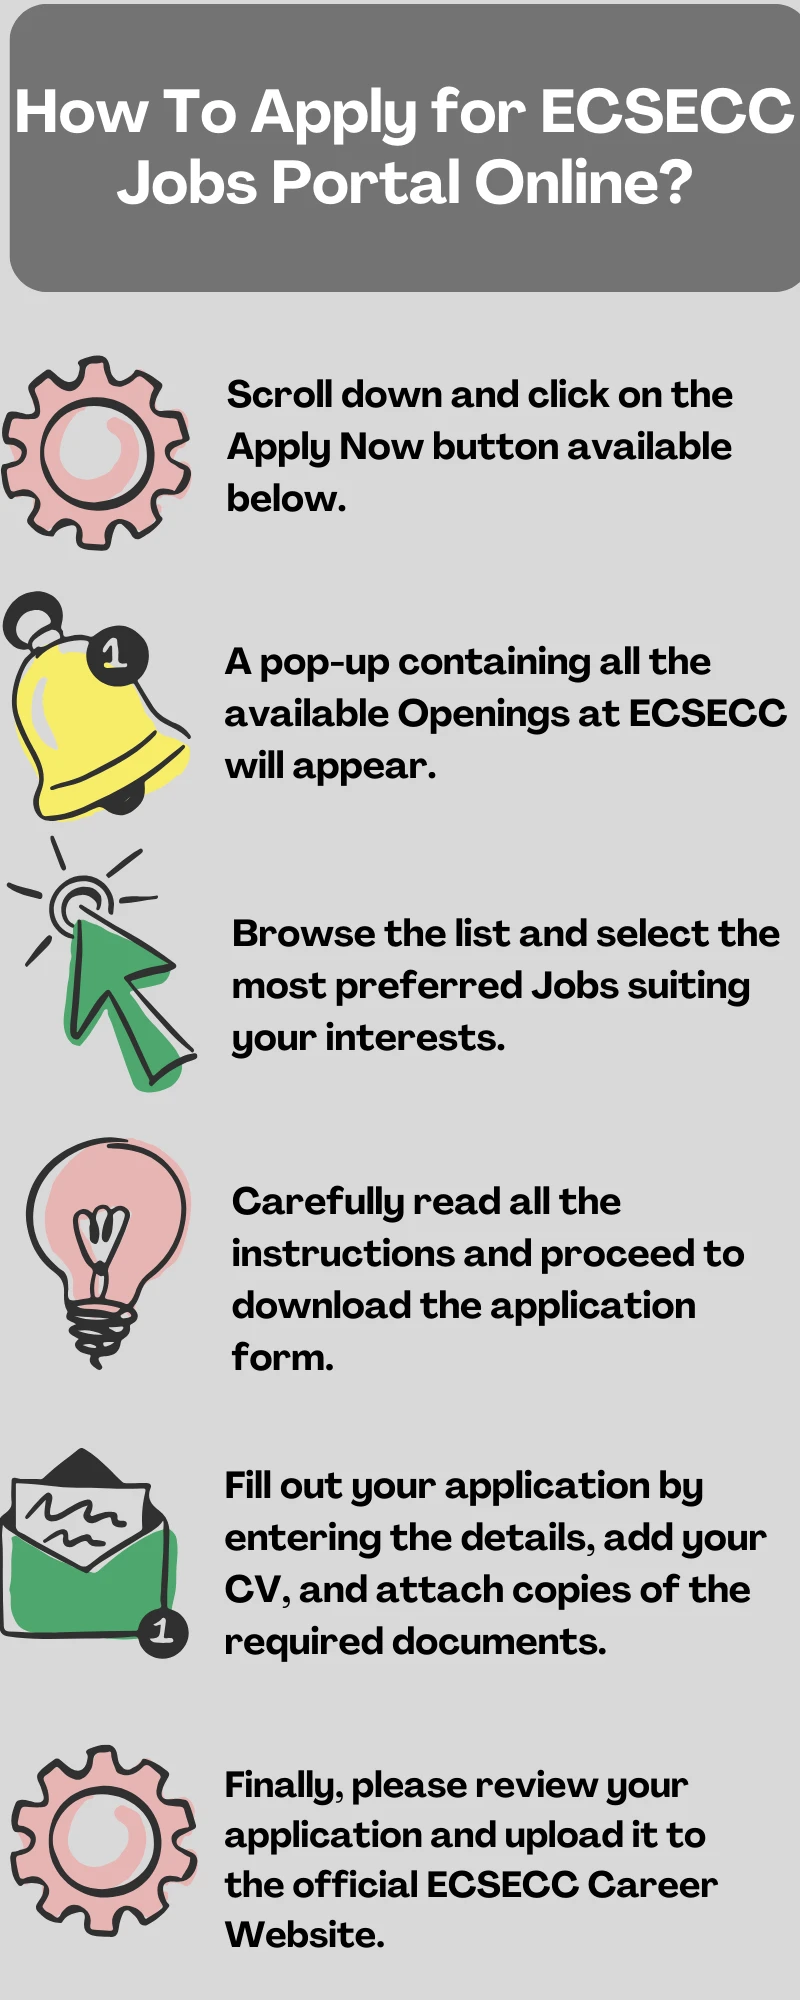 How To Apply for ECSECC Jobs Portal Online?